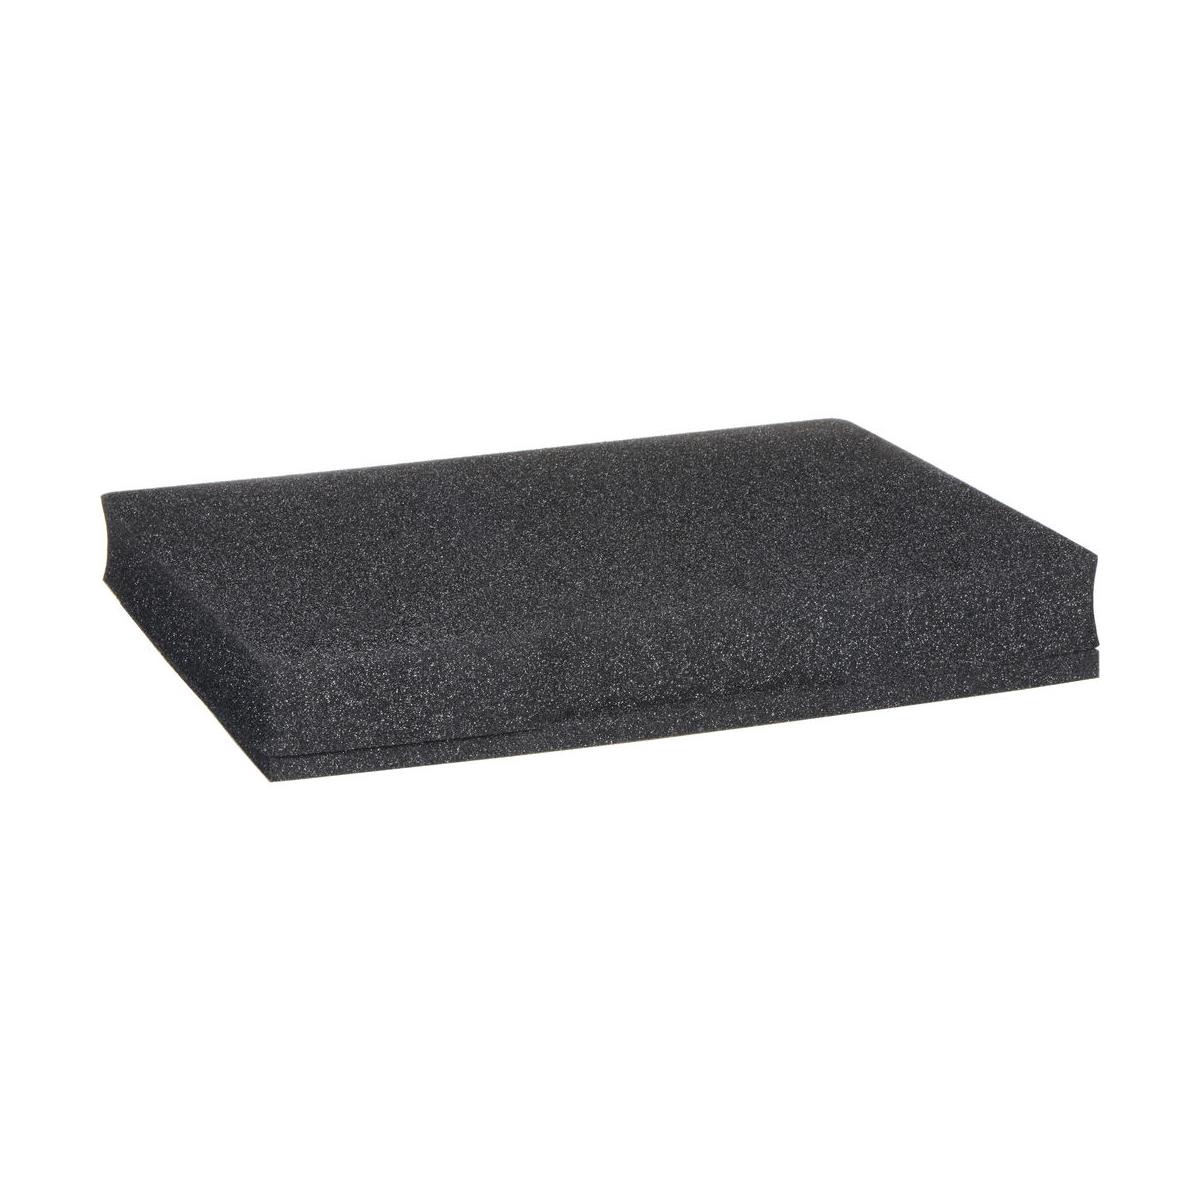 Image of Pelican 1495 High Density Foam Set for 1495CC1 and 1495CC2 Cases